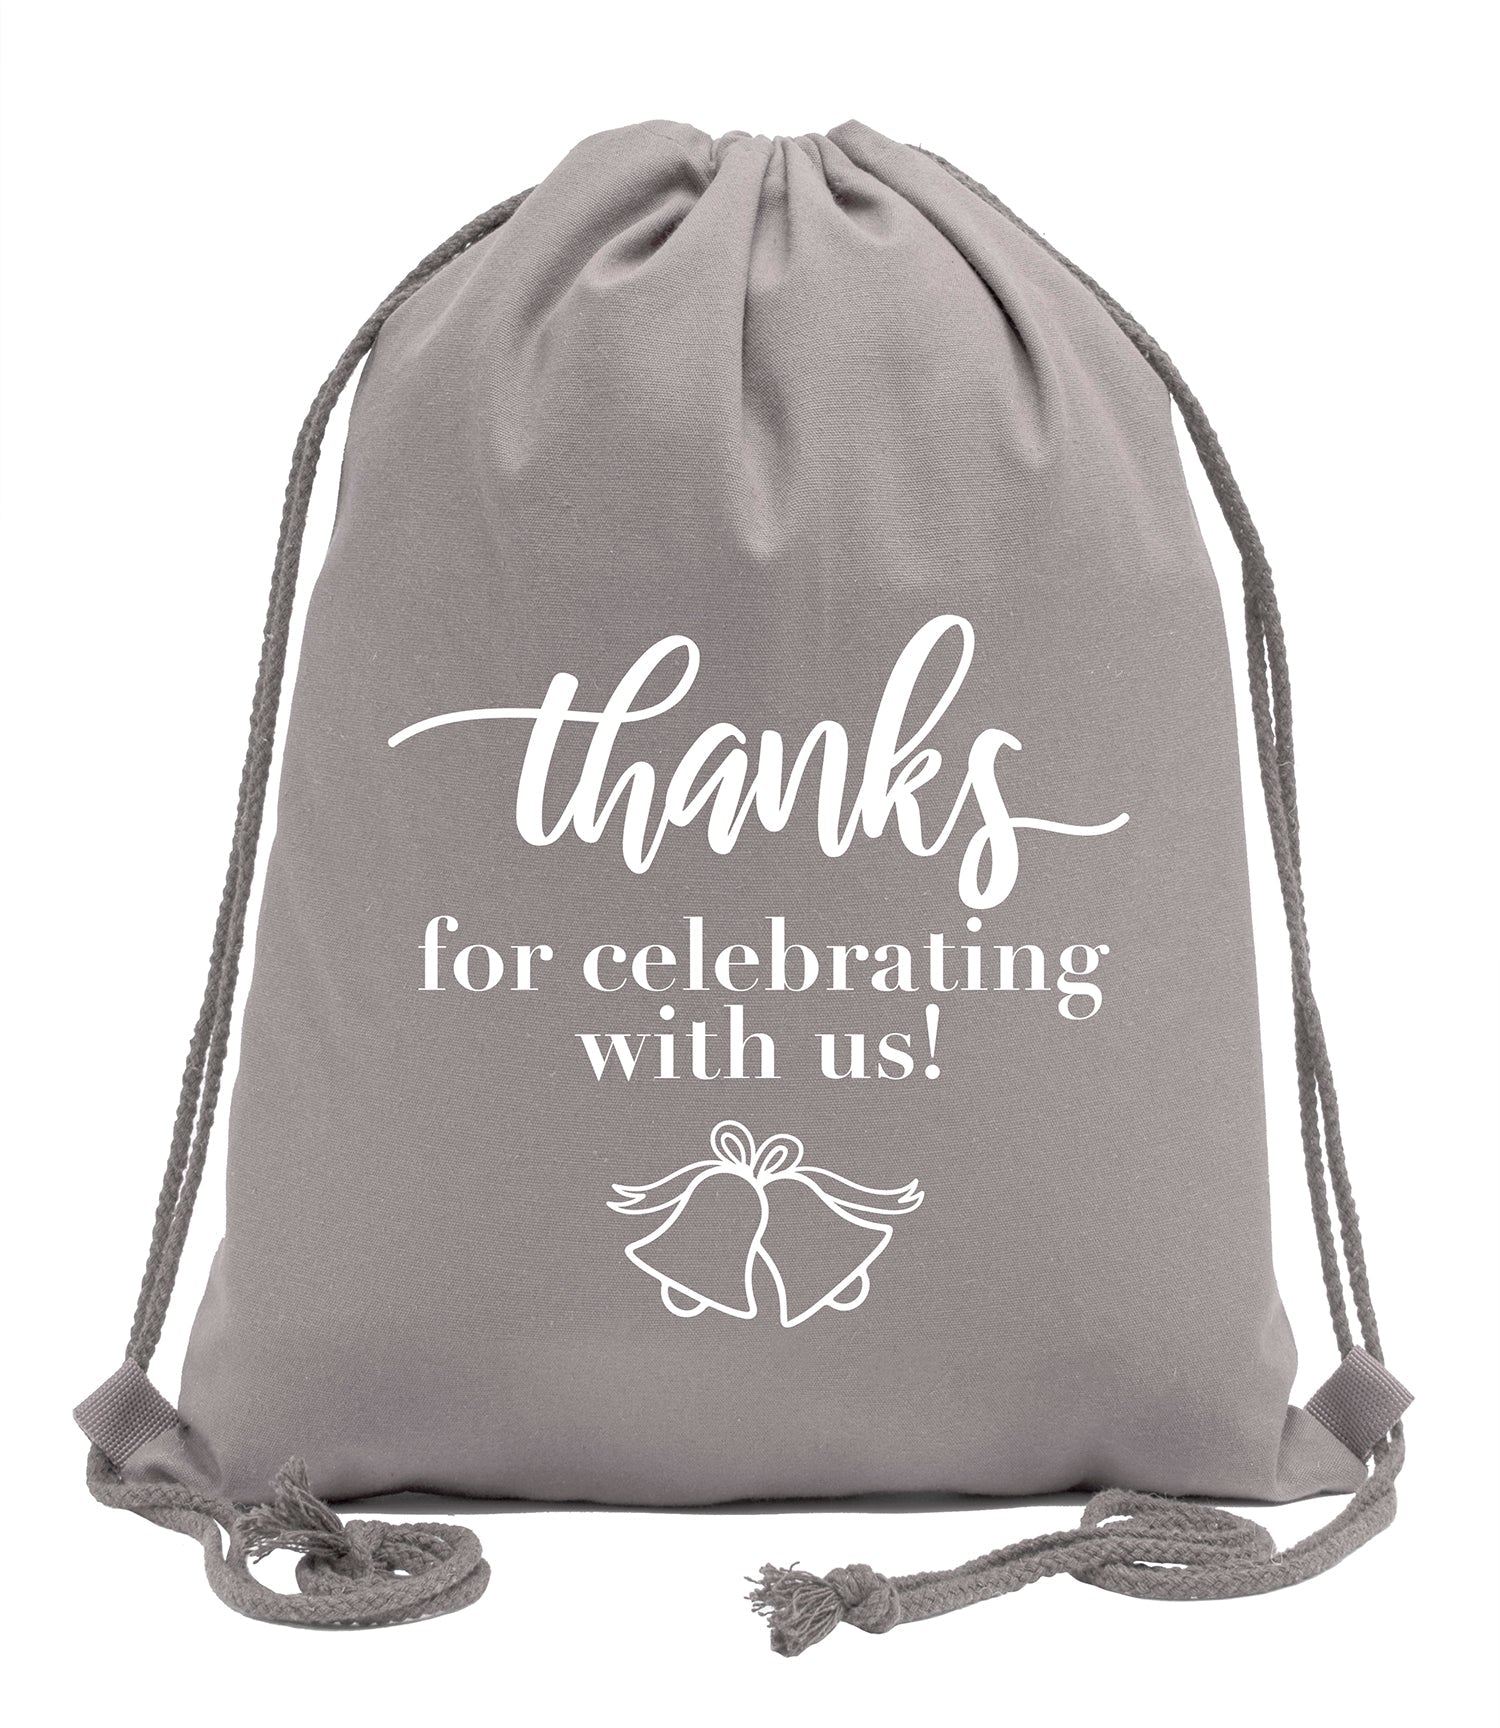 Thanks for Celebrating With Us! + Bells Cotton Drawstring Bag - Mato & Hash